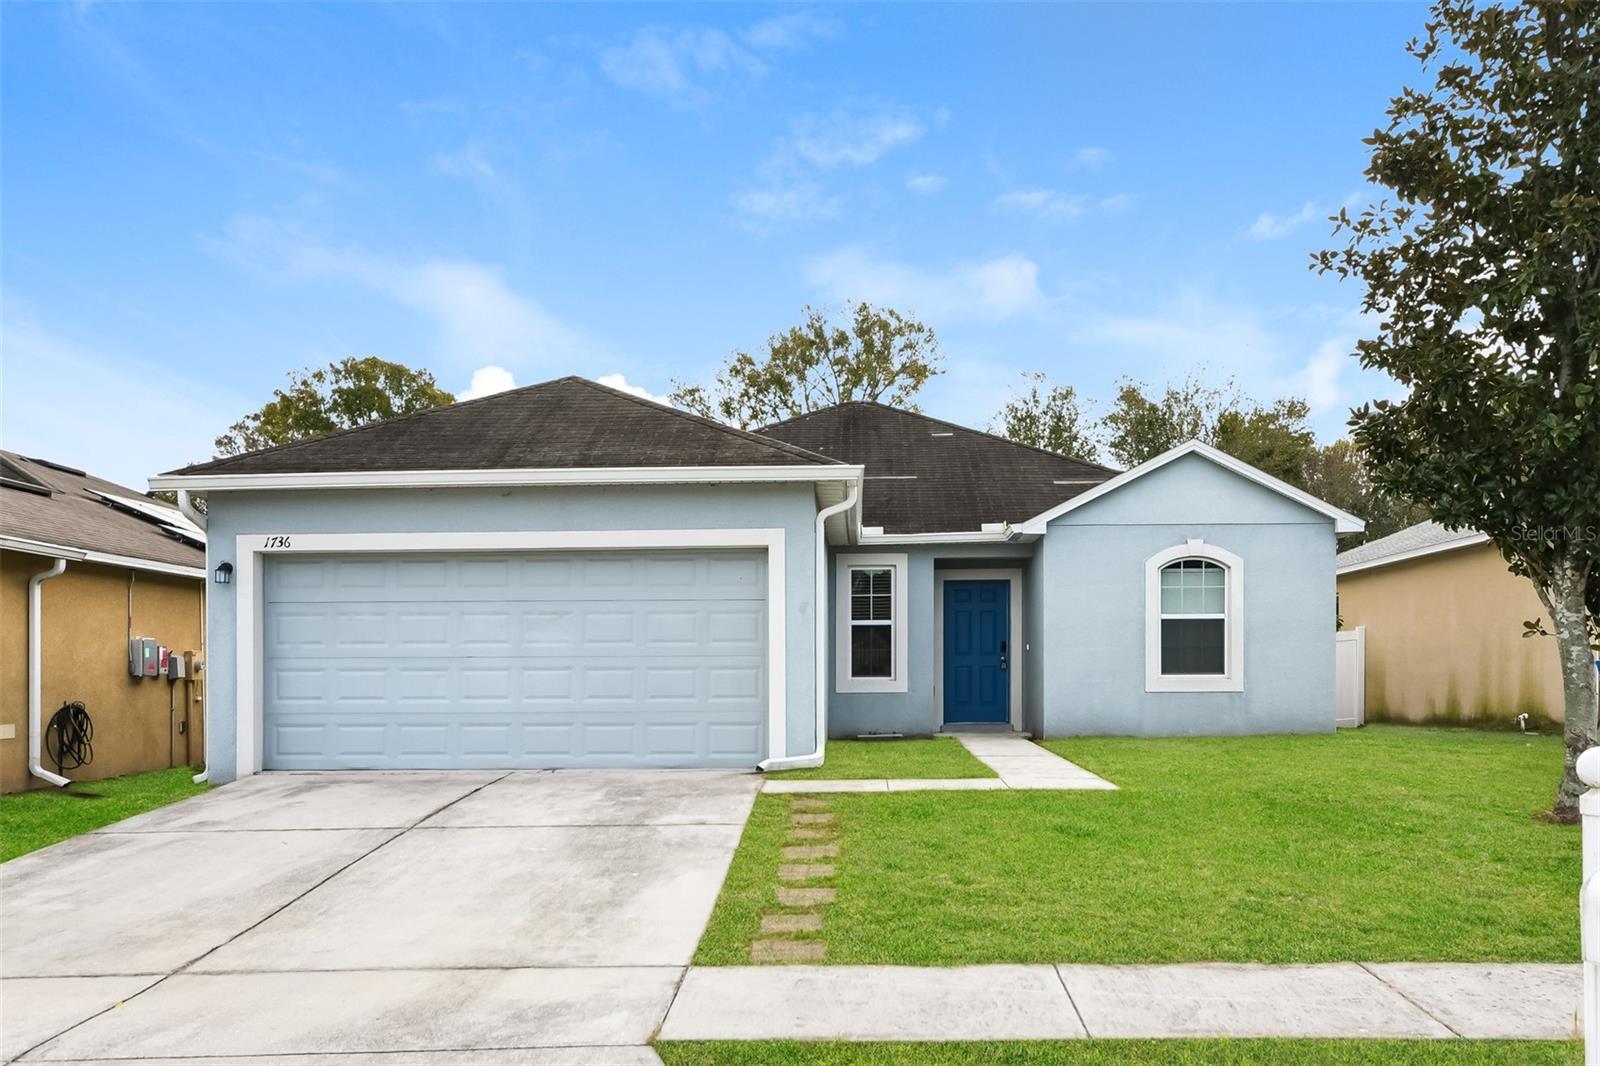 Photo one of 1736 Wallace Manor Loop Winter Haven FL 33880 | MLS O6183176